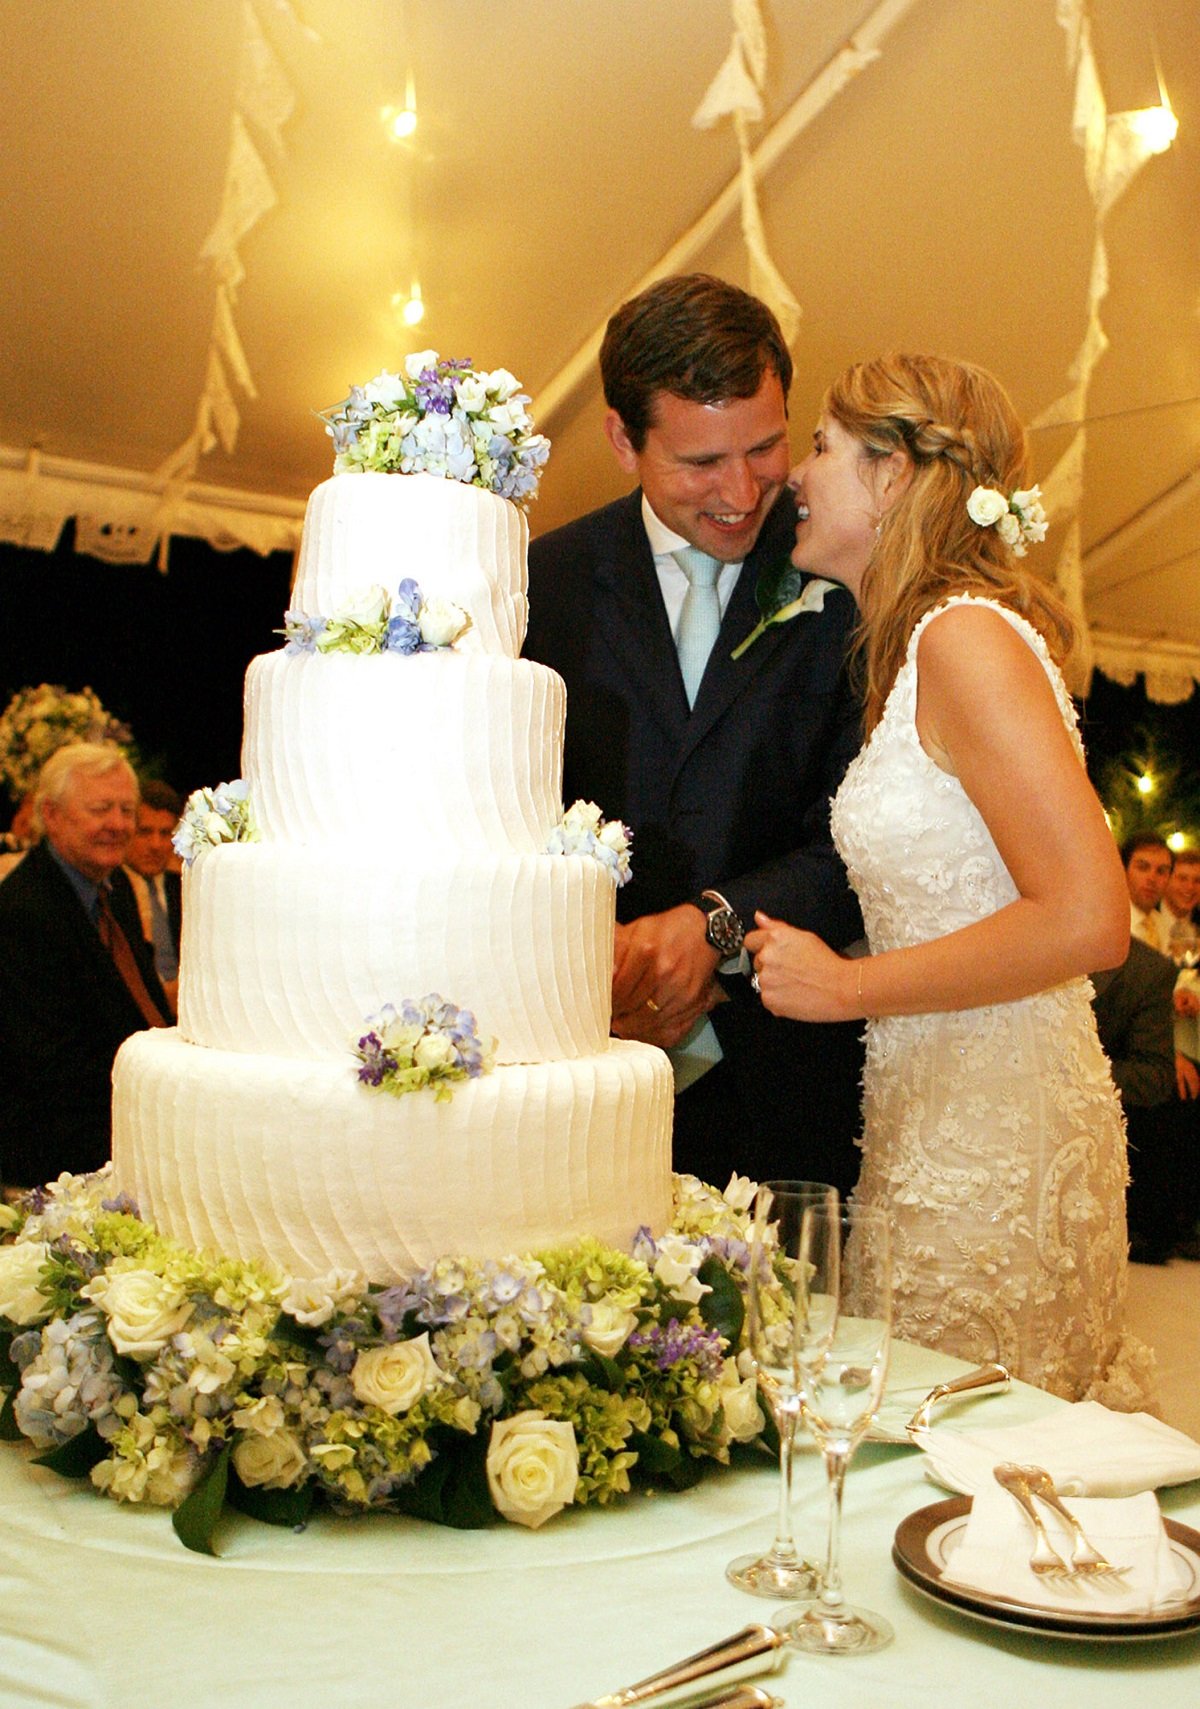 Henry Hager and Jenna Bush Hager at Prairie Chapel Ranch May 10, 2008 near Crawford, Texas | Source: Getty Images 